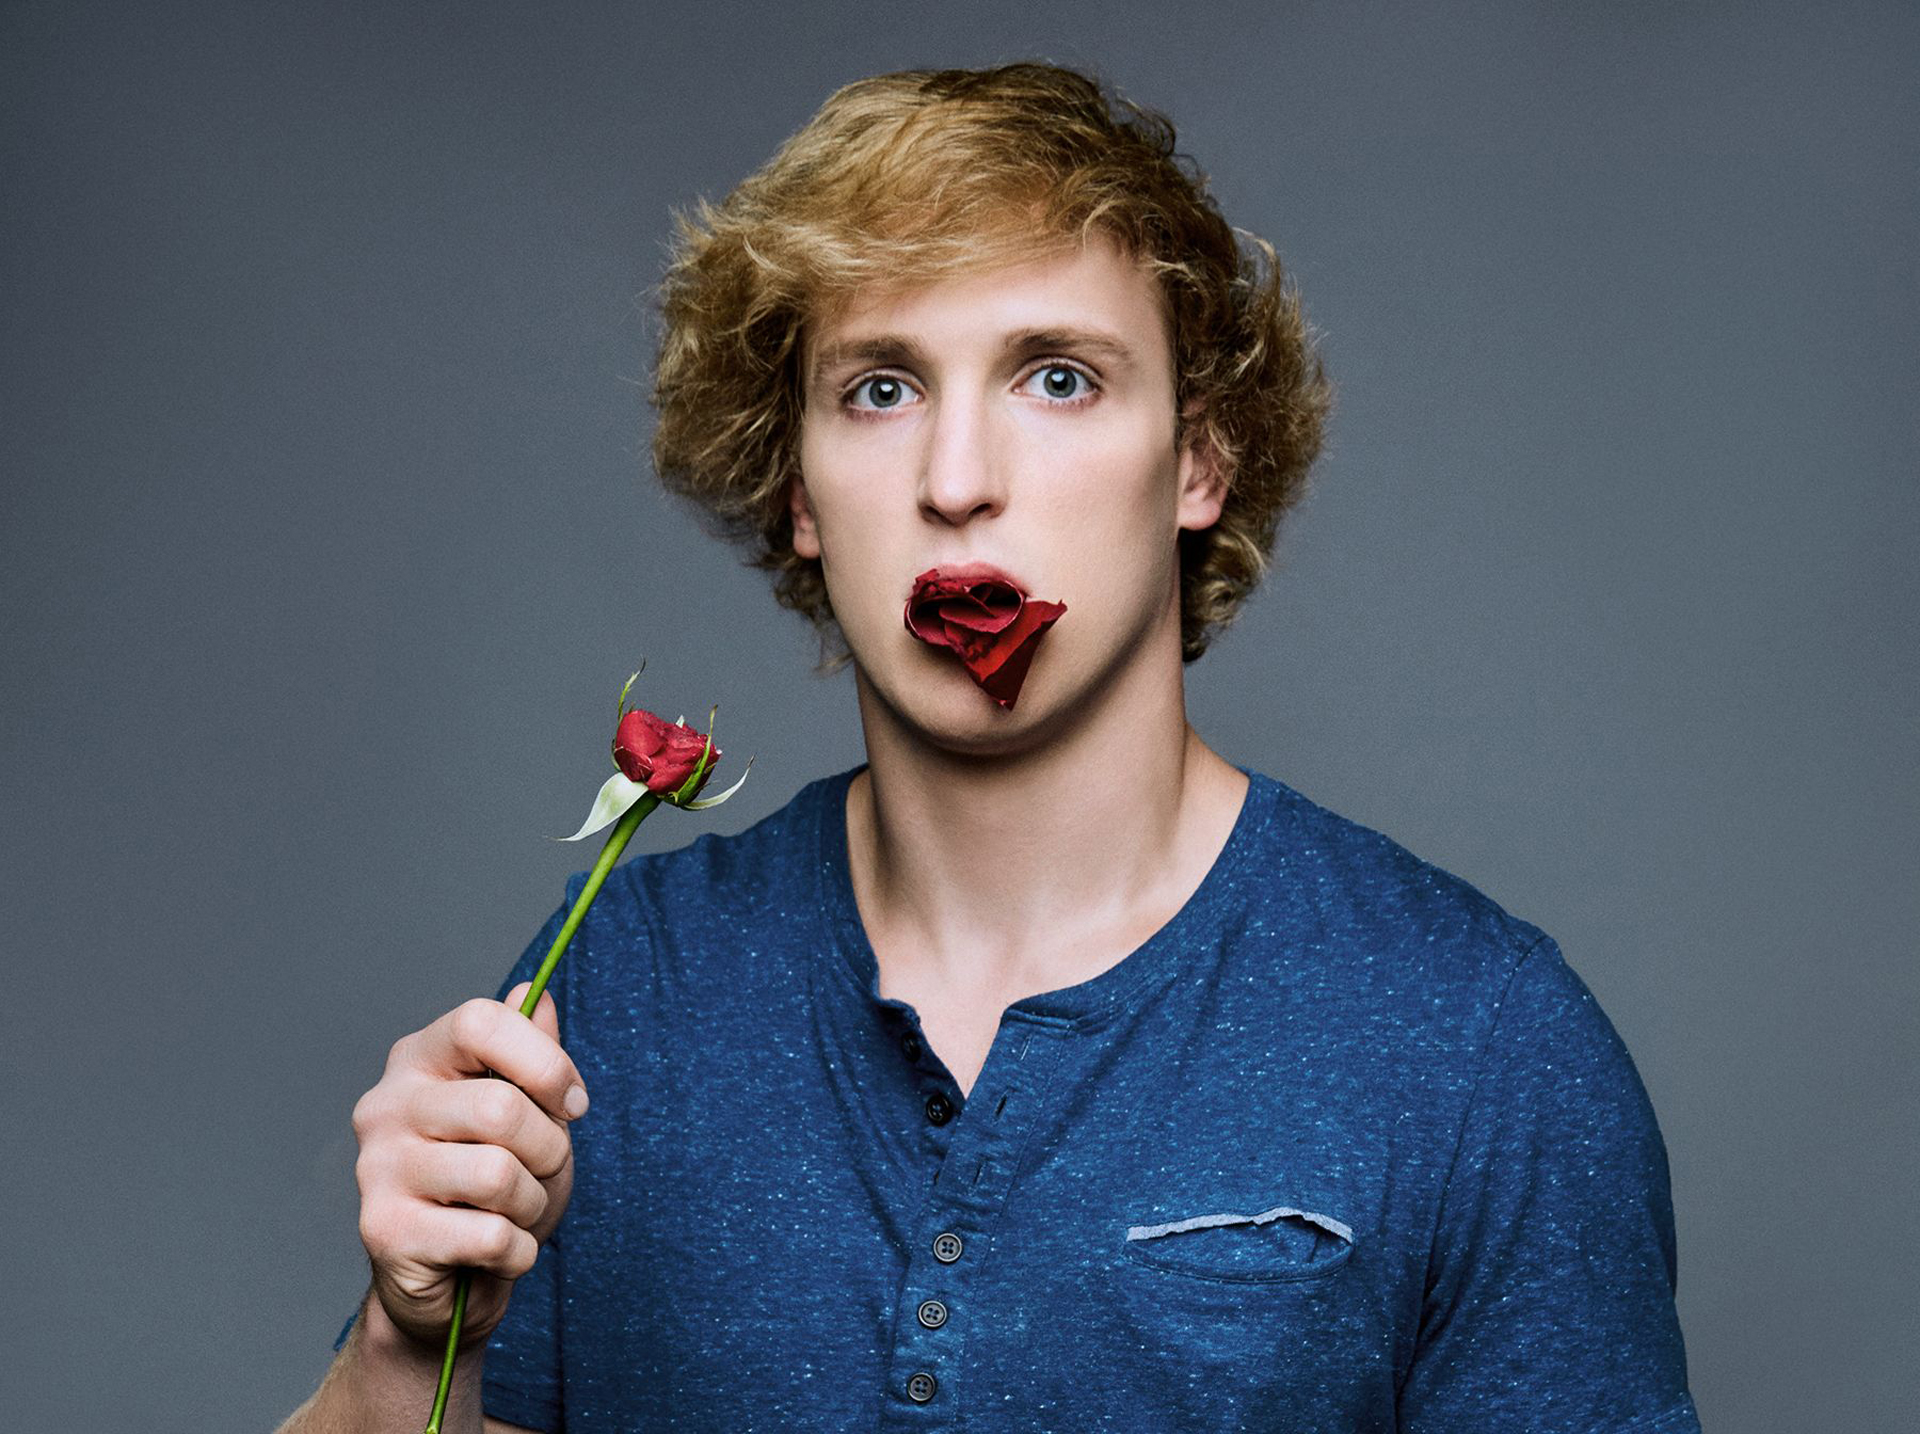 Logan paul hd celebrities k wallpapers images backgrounds photos and pictures